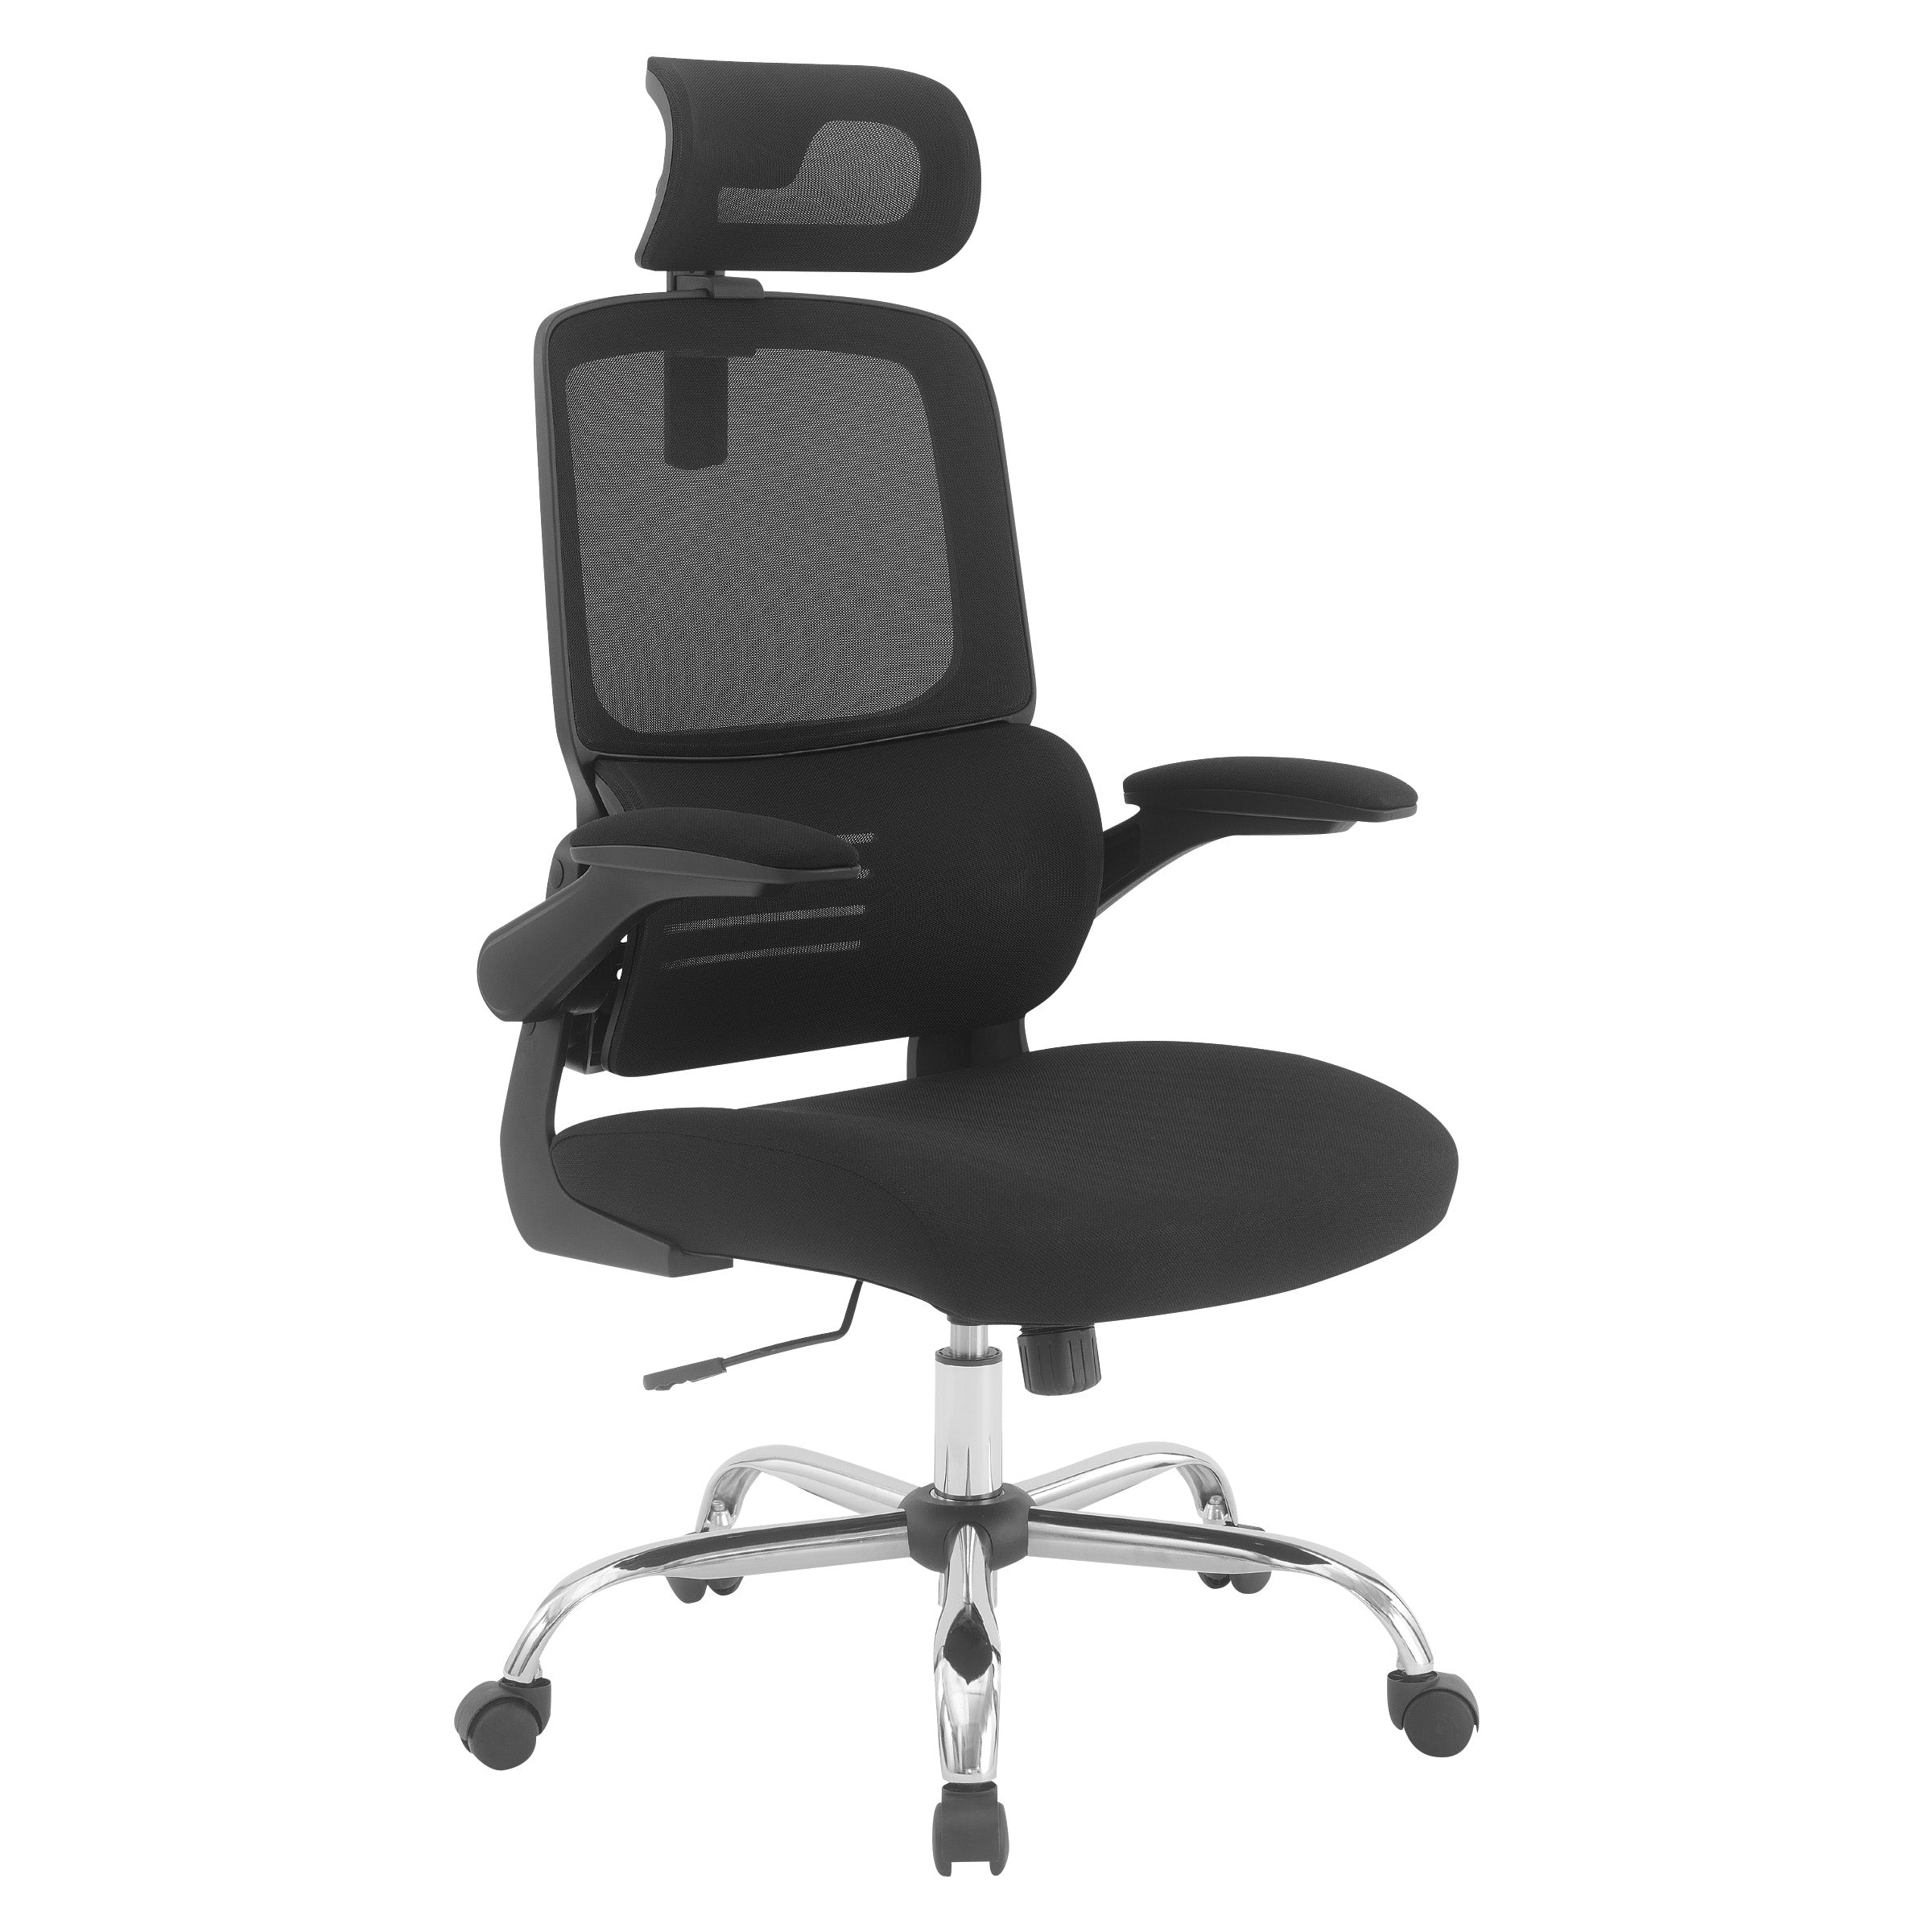 EM60020CHR - Mesh Back Manager's Chair with Adjustable Headrest by OSP